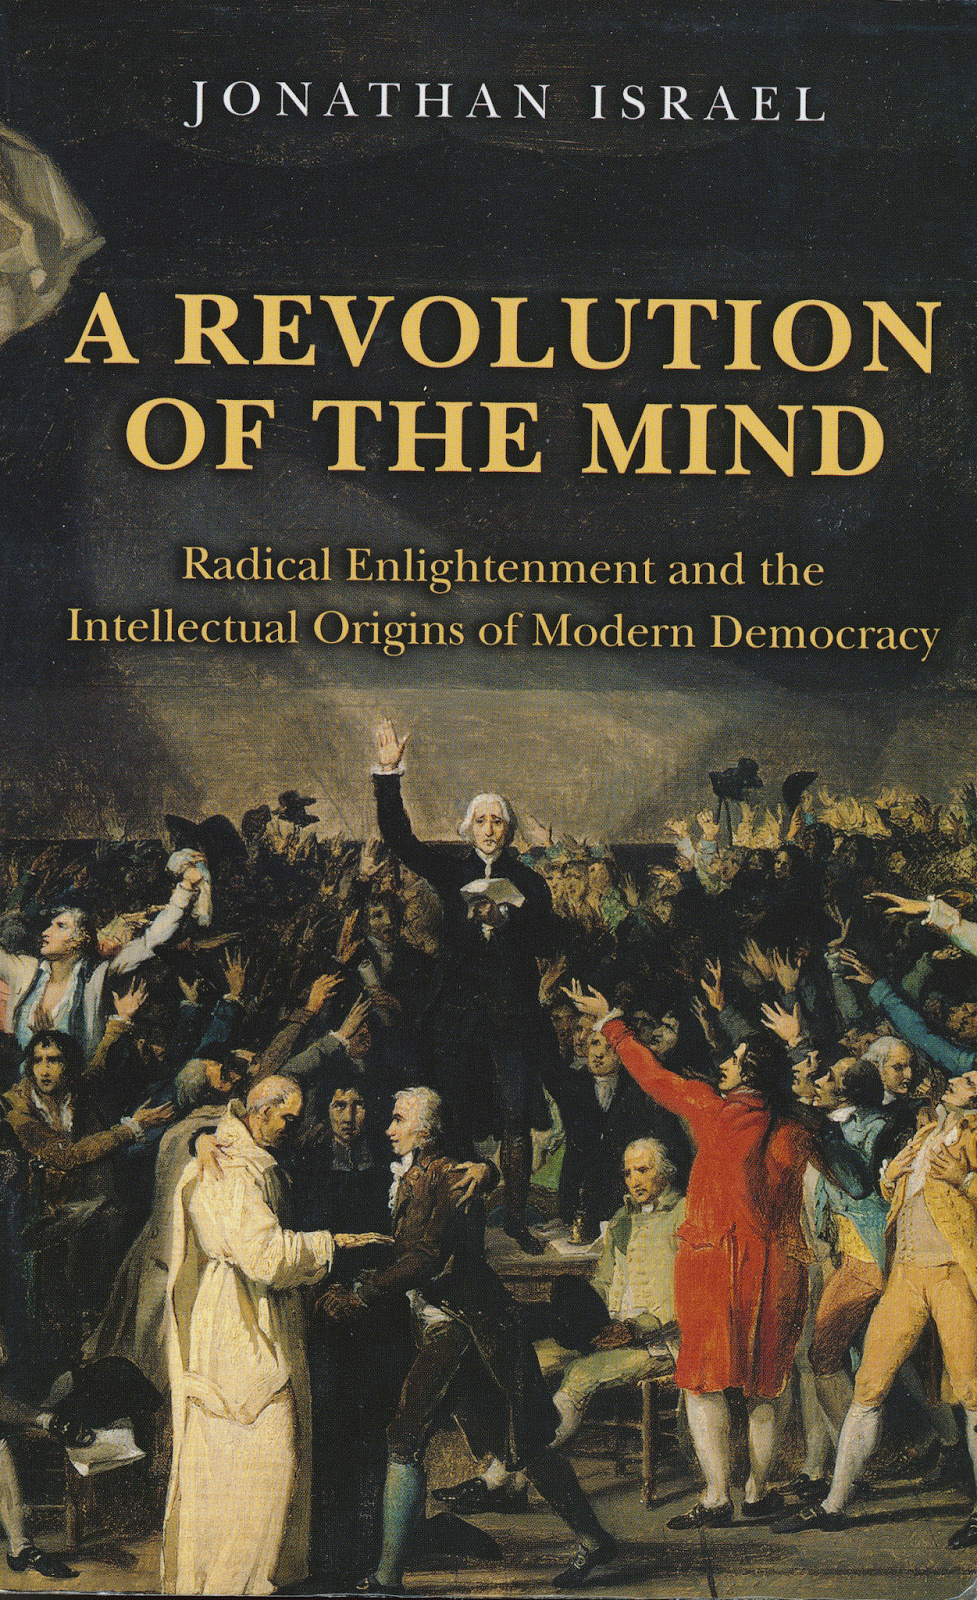 IR and All That: Radical Enlightenment and French Revolution